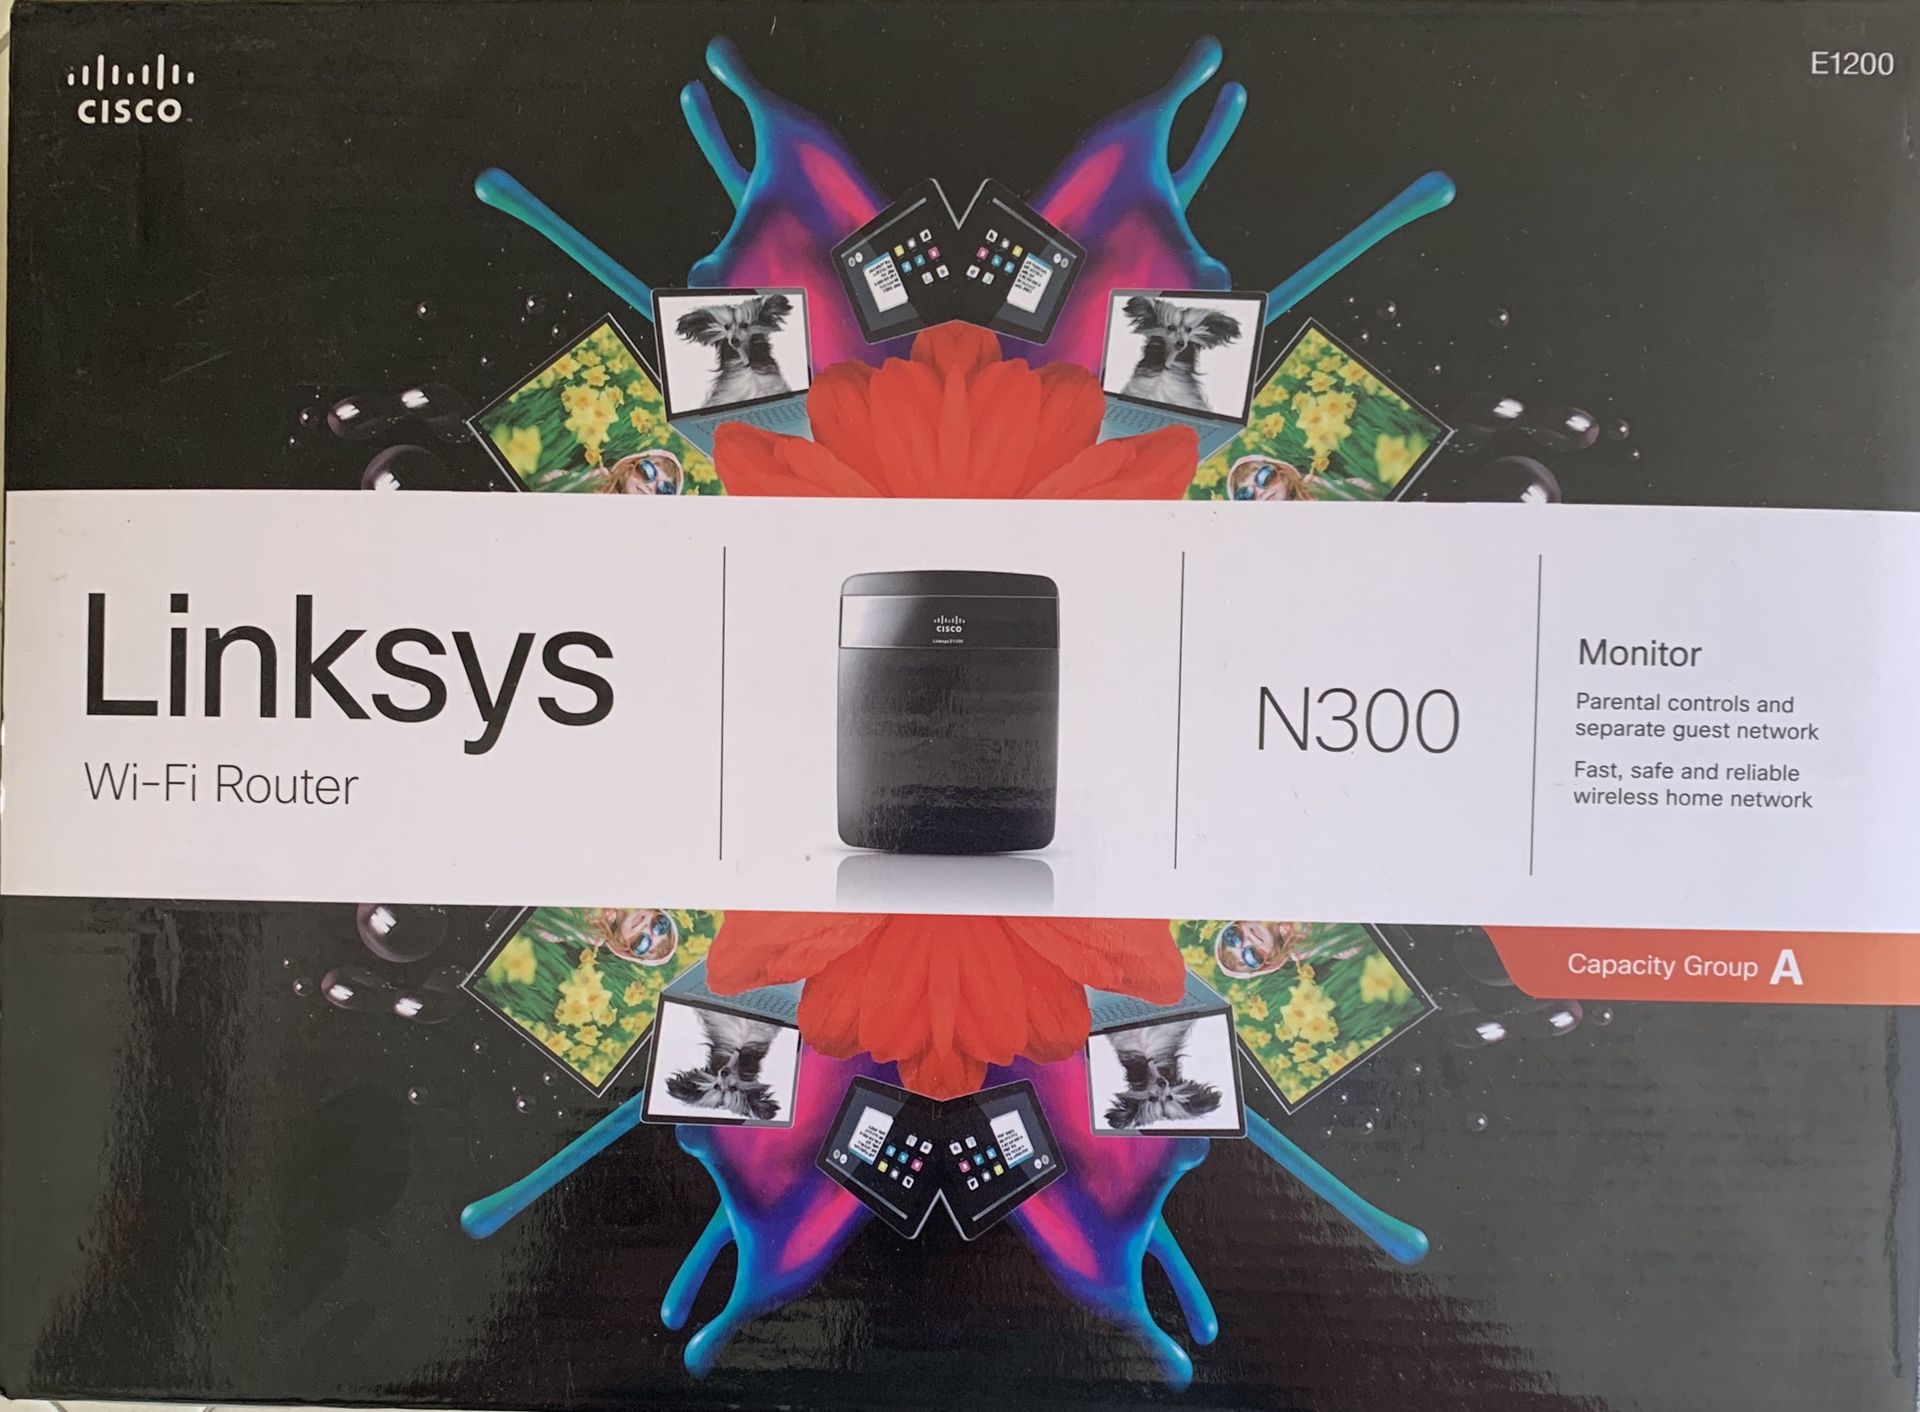 Linksys Wi-Fi Router N300